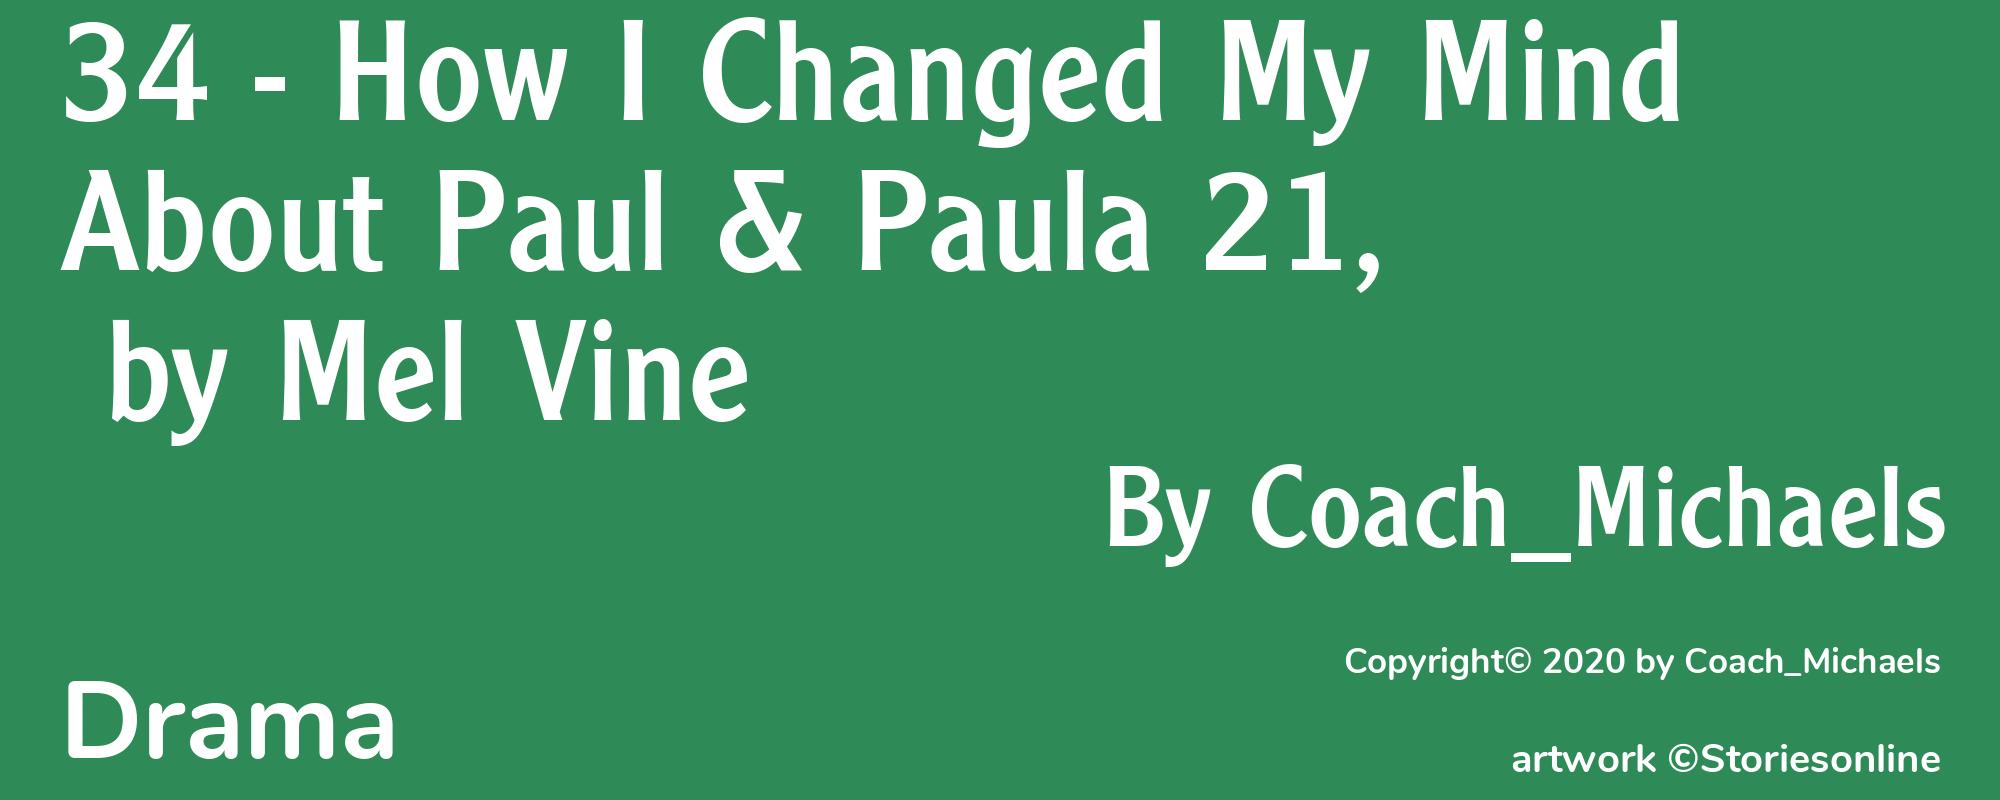 34 - How I Changed My Mind About Paul & Paula 21, by Mel Vine - Cover